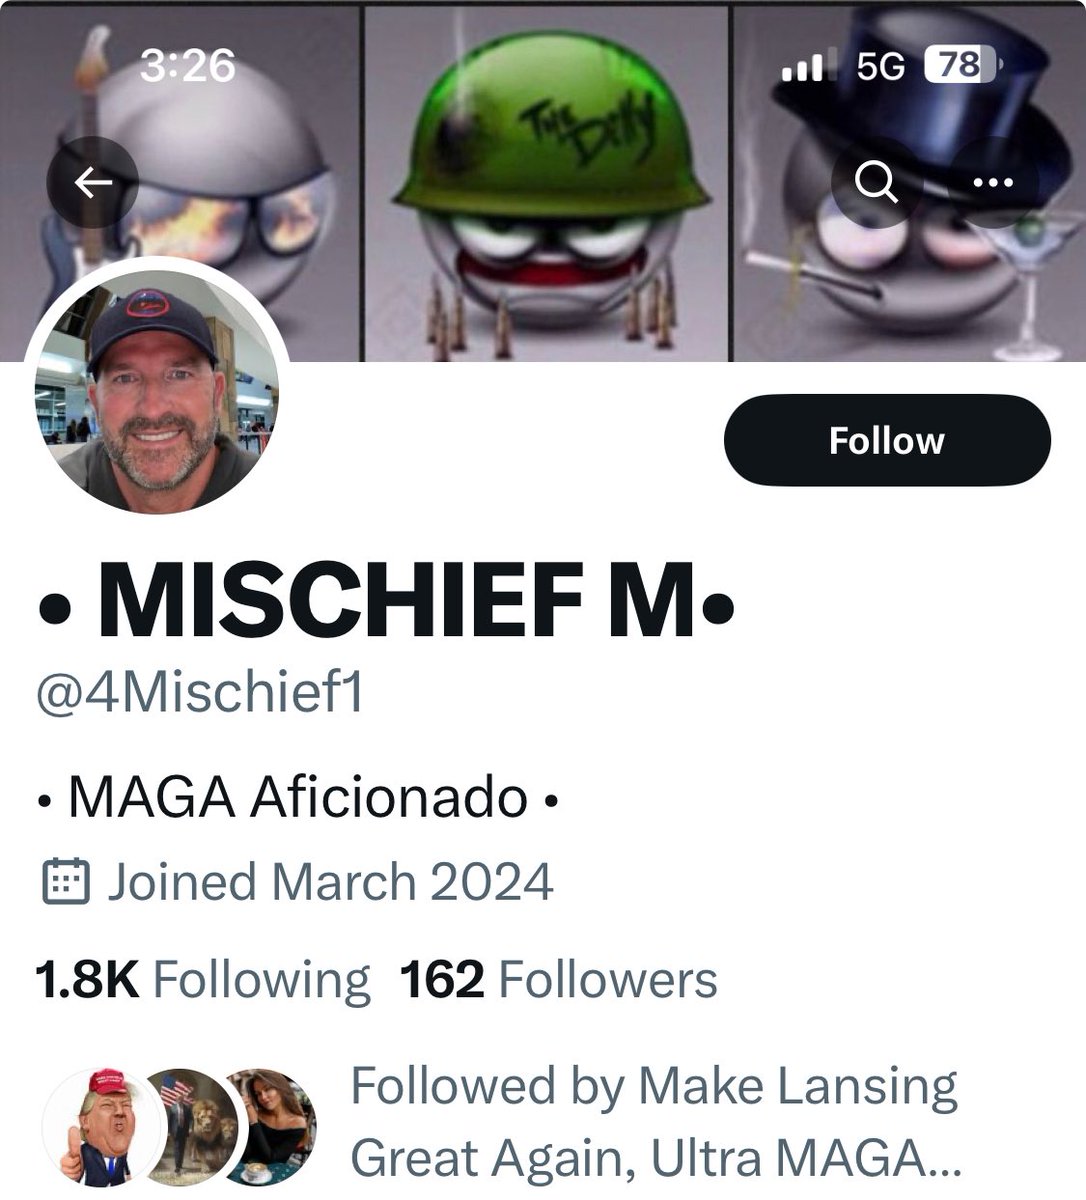 Friends, @4Mischief1 is someone pretending to be me. Please block and report. Thank You